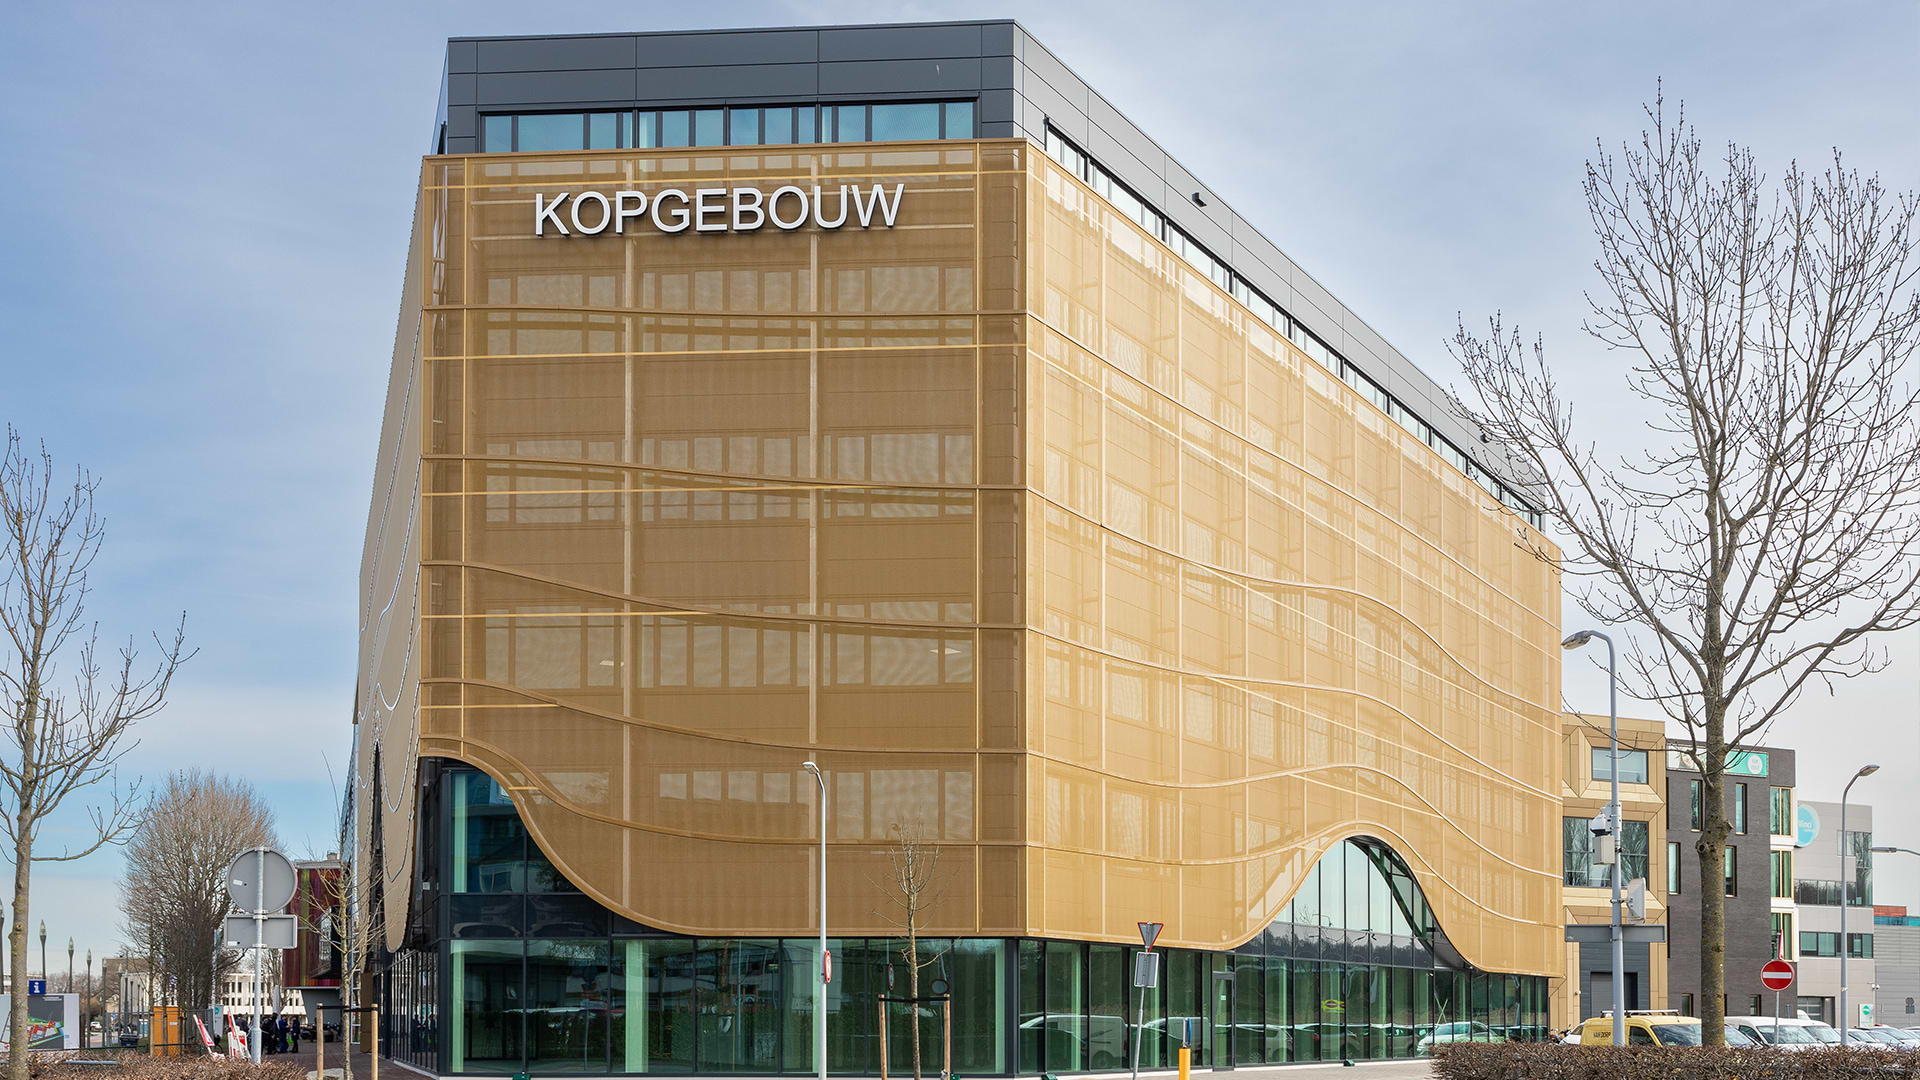 Distinctive Facade The Kopgebouw provides a connection between companies and students. The Dordrecht Academy is located on the fourth and fifth floors. The remaining floors are reserved for companies that align with the campus profile of the Smart Campus Leerpark and have a connection to technology and innovation. This combination makes the Kopgebouw a place where education and the business world meet and strengthen each other. With its distinctive facade featuring draped theater curtains, the Kopgebouw is a recognizable landmark at the entrance of Leerpark. The Kopgebouw features a central atrium and a direct connection to the Duurzaamheidsfabriek on the fourth floor via a pedestrian bridge. The ground floor and the first three floors of the building are available for innovative companies and startups in the fields of sustainability, energy, new manufacturing, and innovative maritime solutions. The atrium provides space for lunch, flexible working, meetings, and celebrating successes. Additionally, there are meeting facilities available on the ground floor. Are you looking for an office at the Smart Campus Leerpark? Contact us directly, and we would be happy to discuss the possibilities with you.